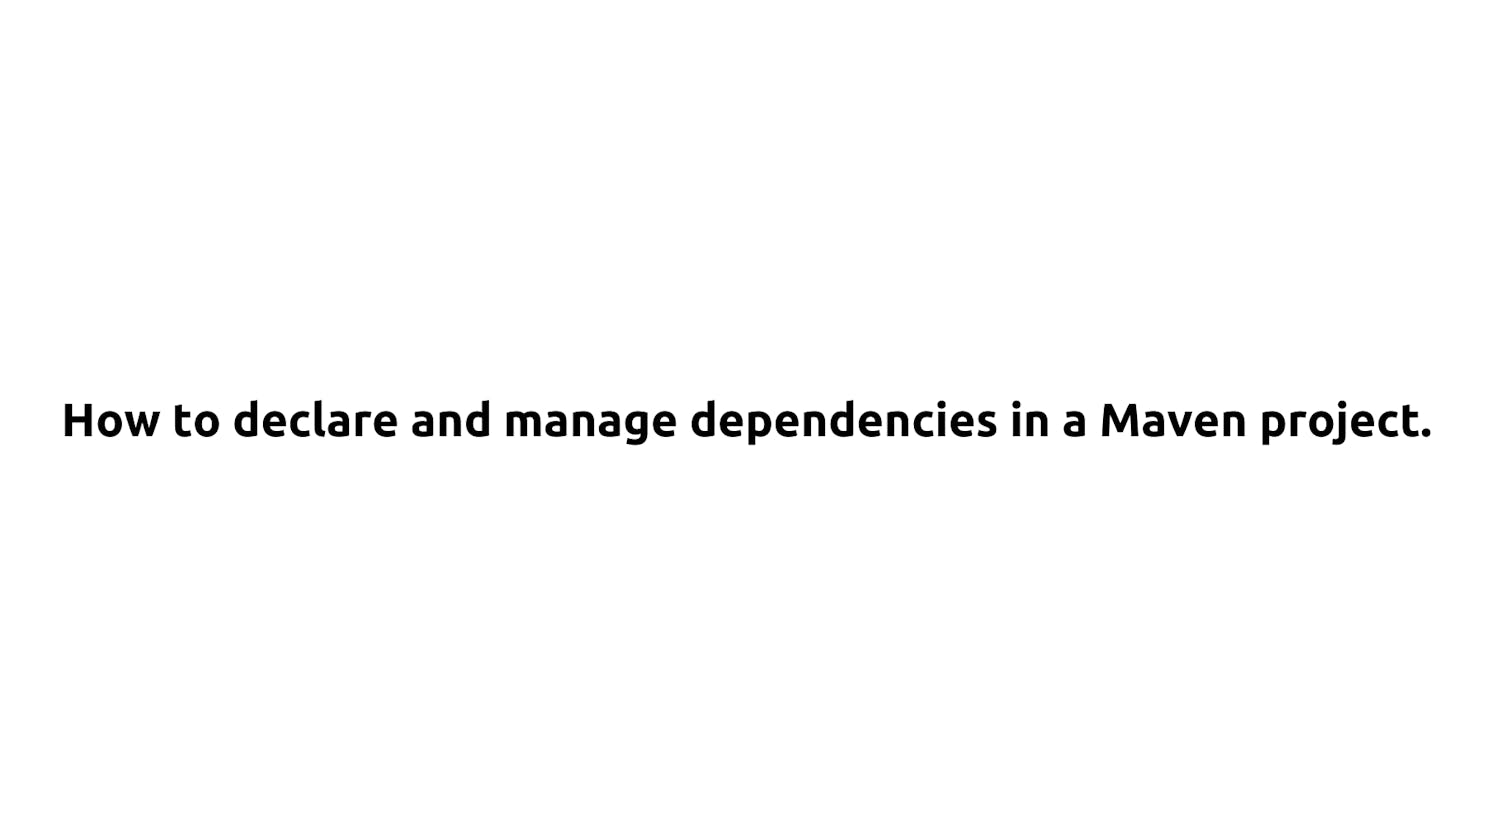 Mastering Dependency Declaration and Management in Maven Projects